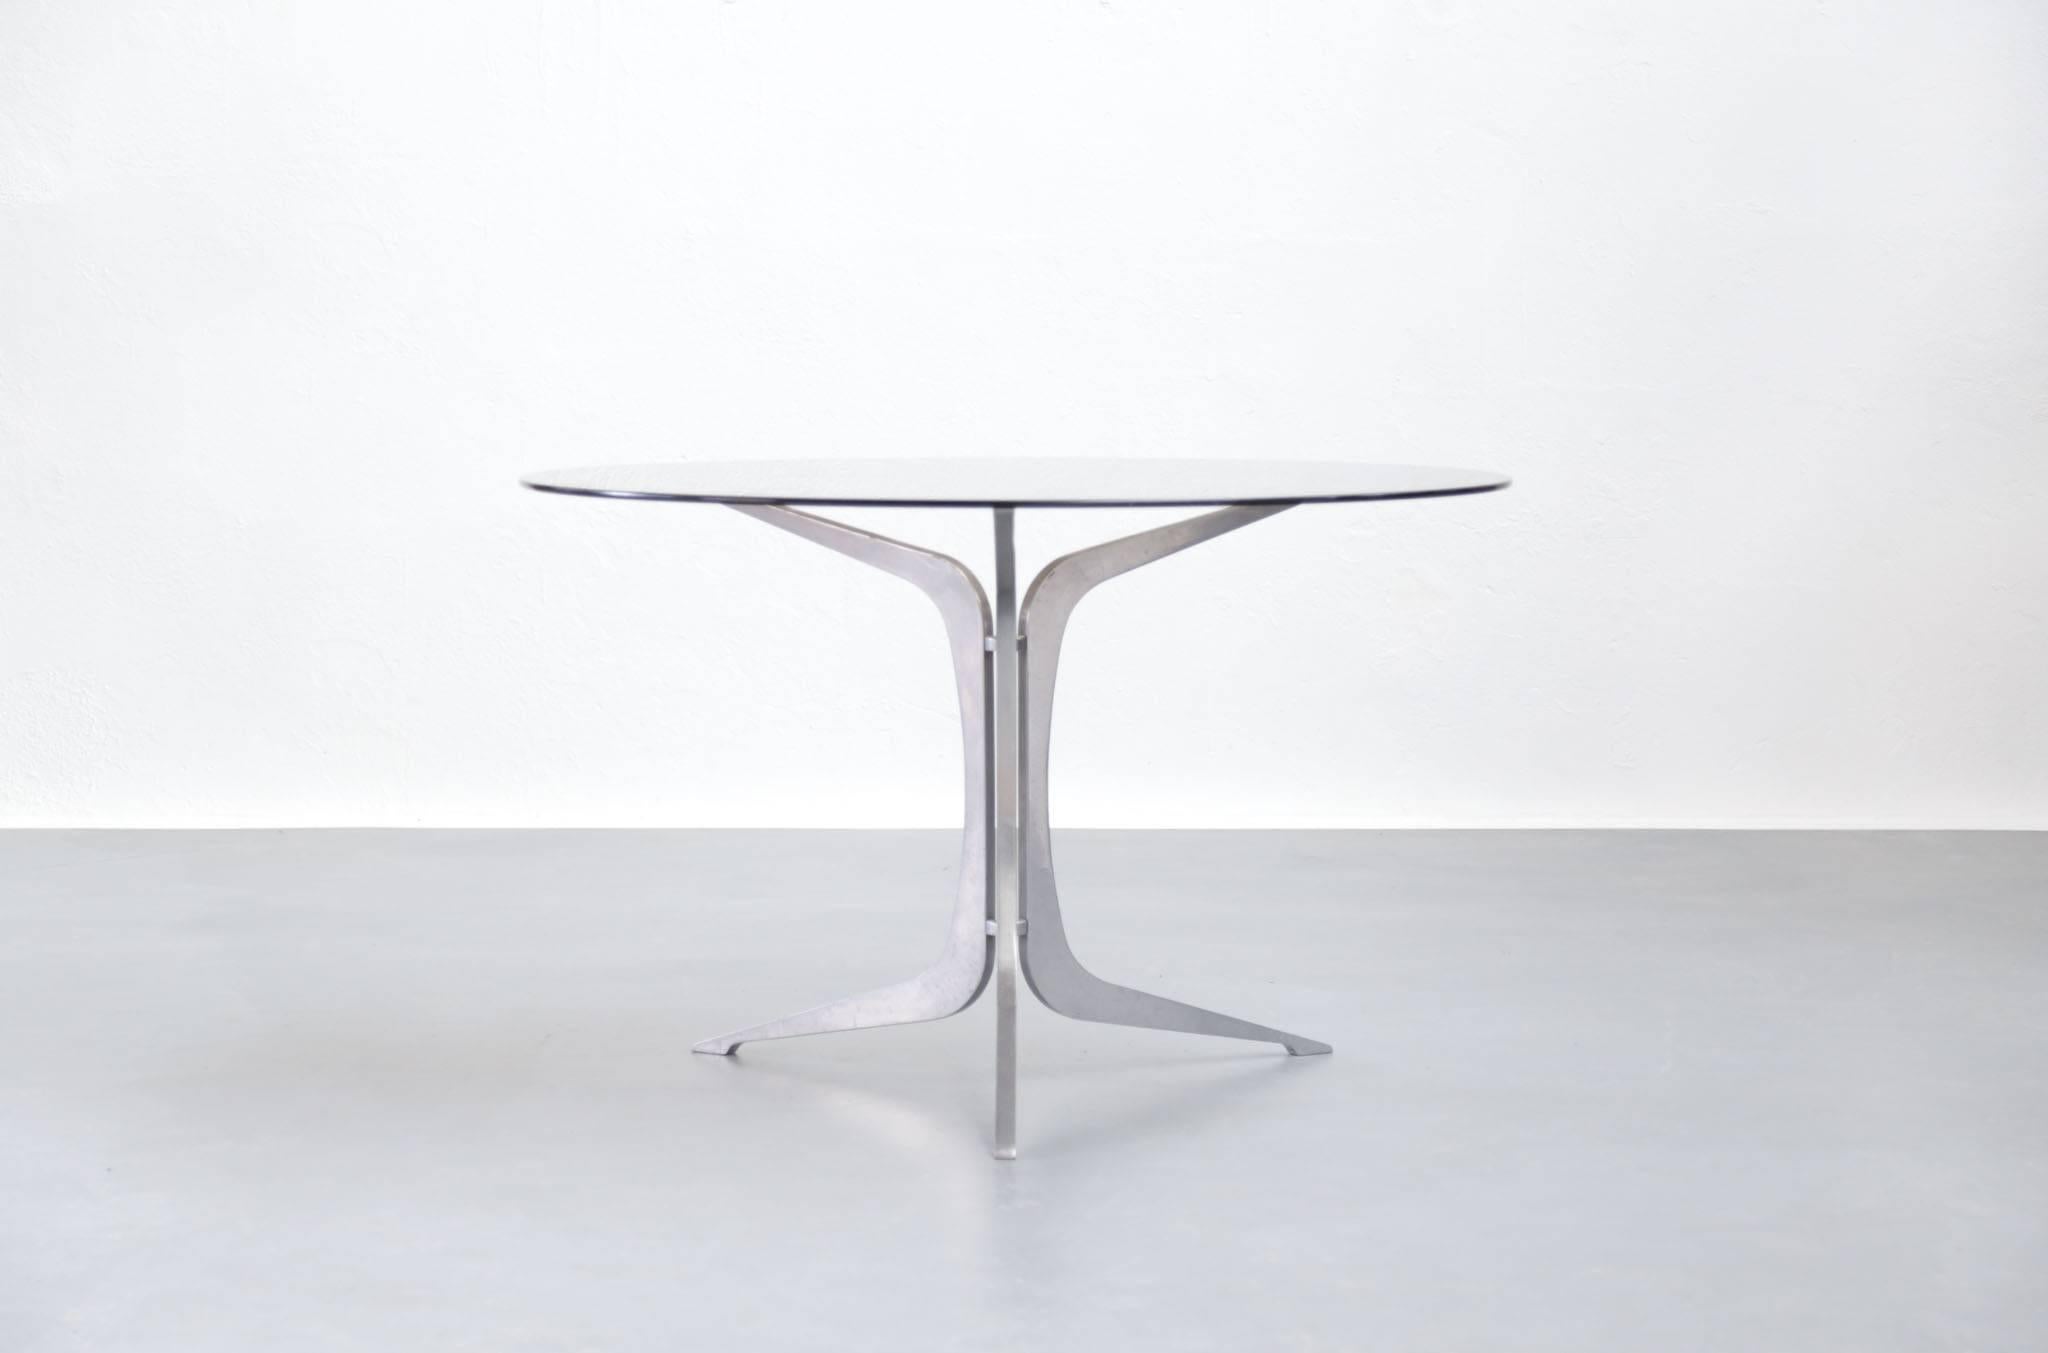 Dining table made of metal leg and smoked glass on top.